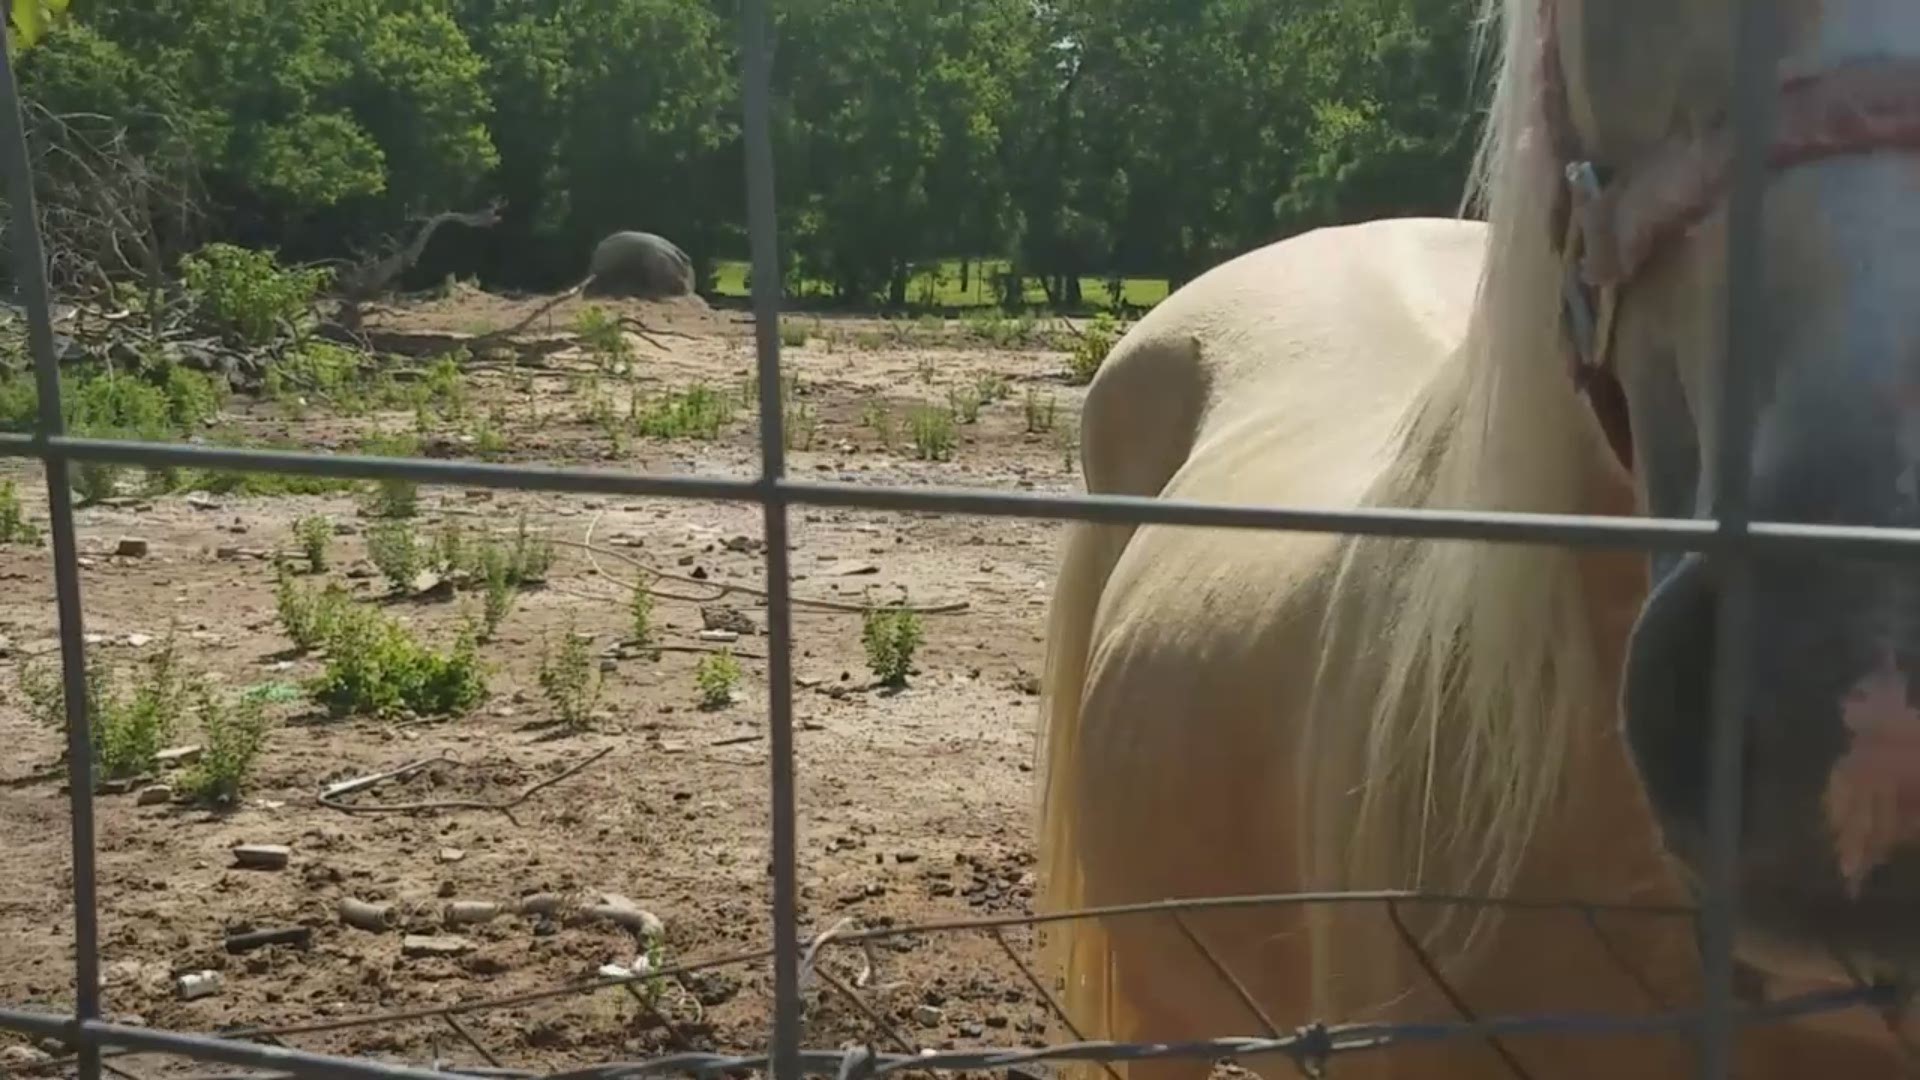 The Houston SPCA and Precinct 1 are rescuing 32 equine, 34 rabbits, four cats and three dogs from a property in Cypress due to signs of serious abuse and neglect.